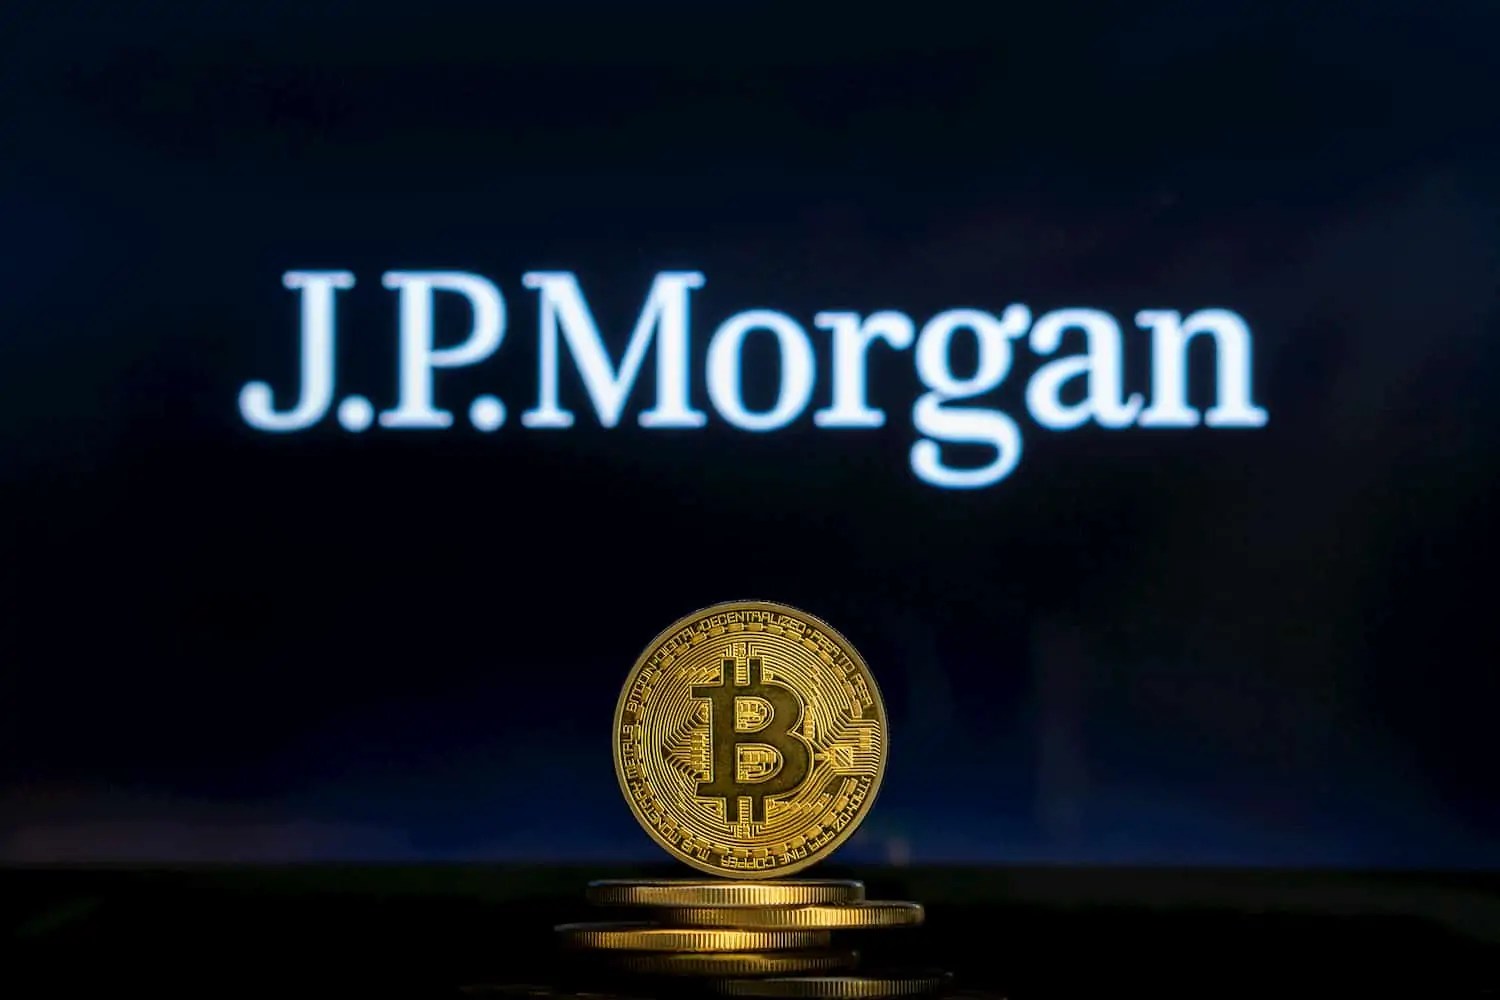 Bitcoin-price-could-rise-to-146000-according-to-JPMorgan-Chase-bank.jpg